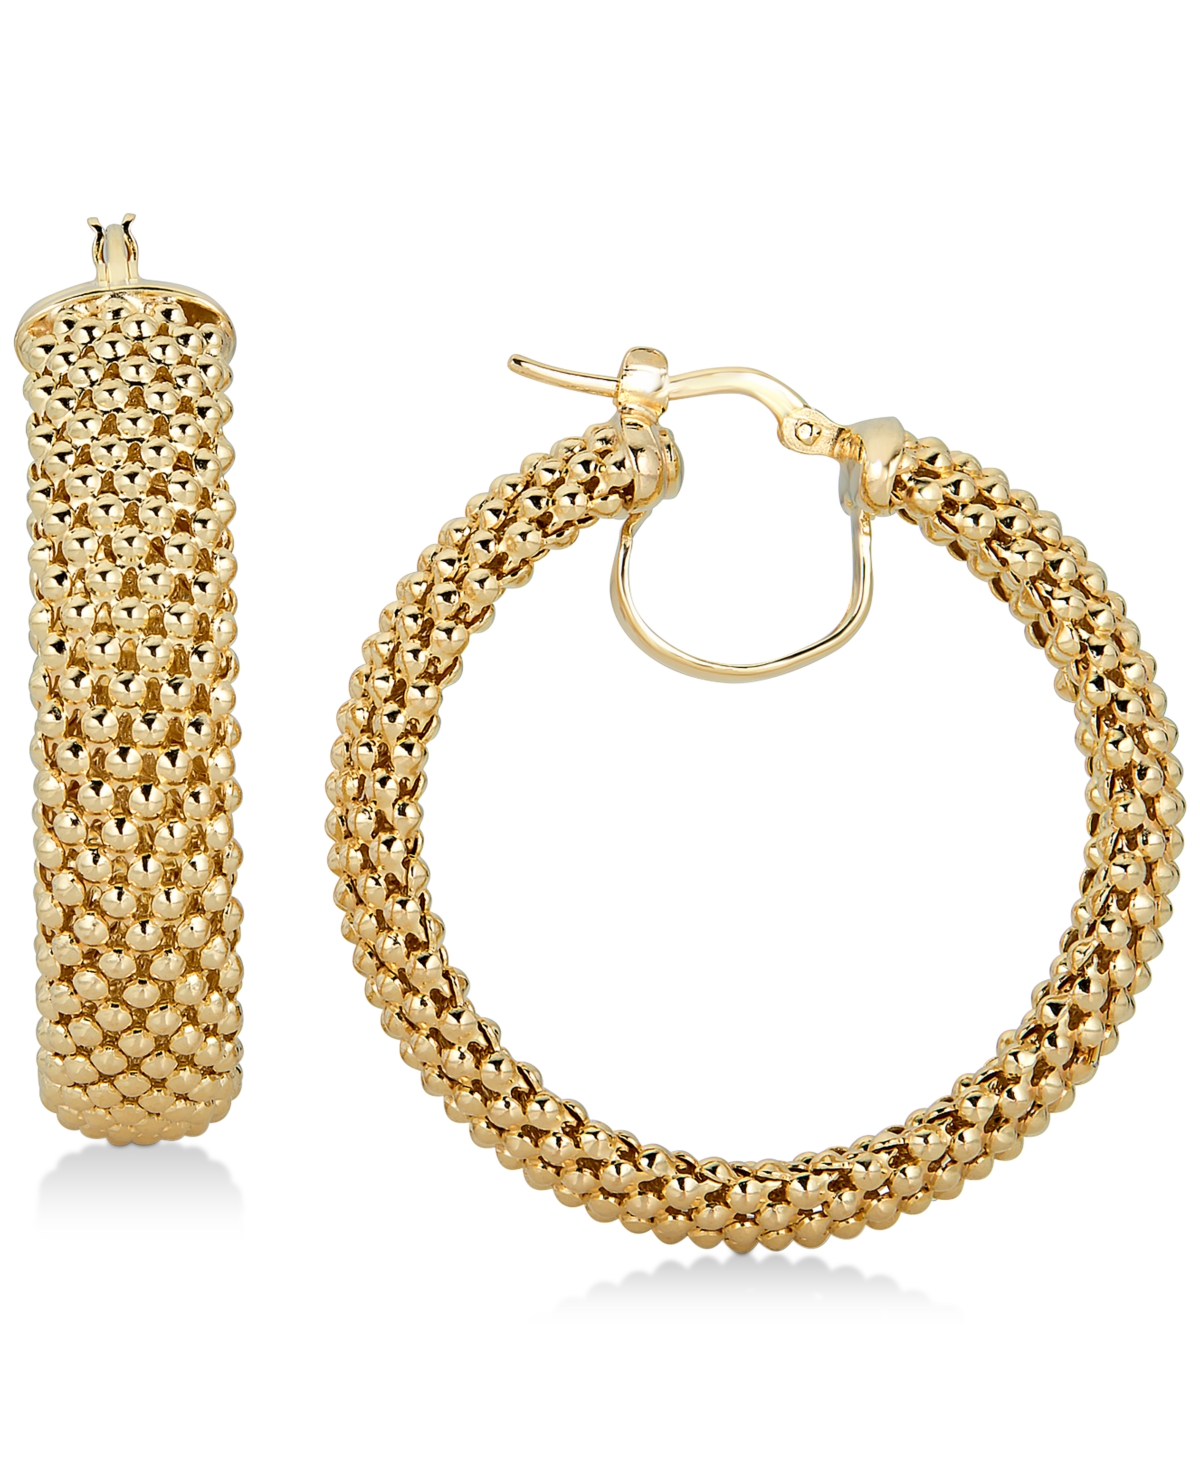 Mesh Hoop Earrings in 14k Gold-Plated Sterling Silver - Gold Over Silver